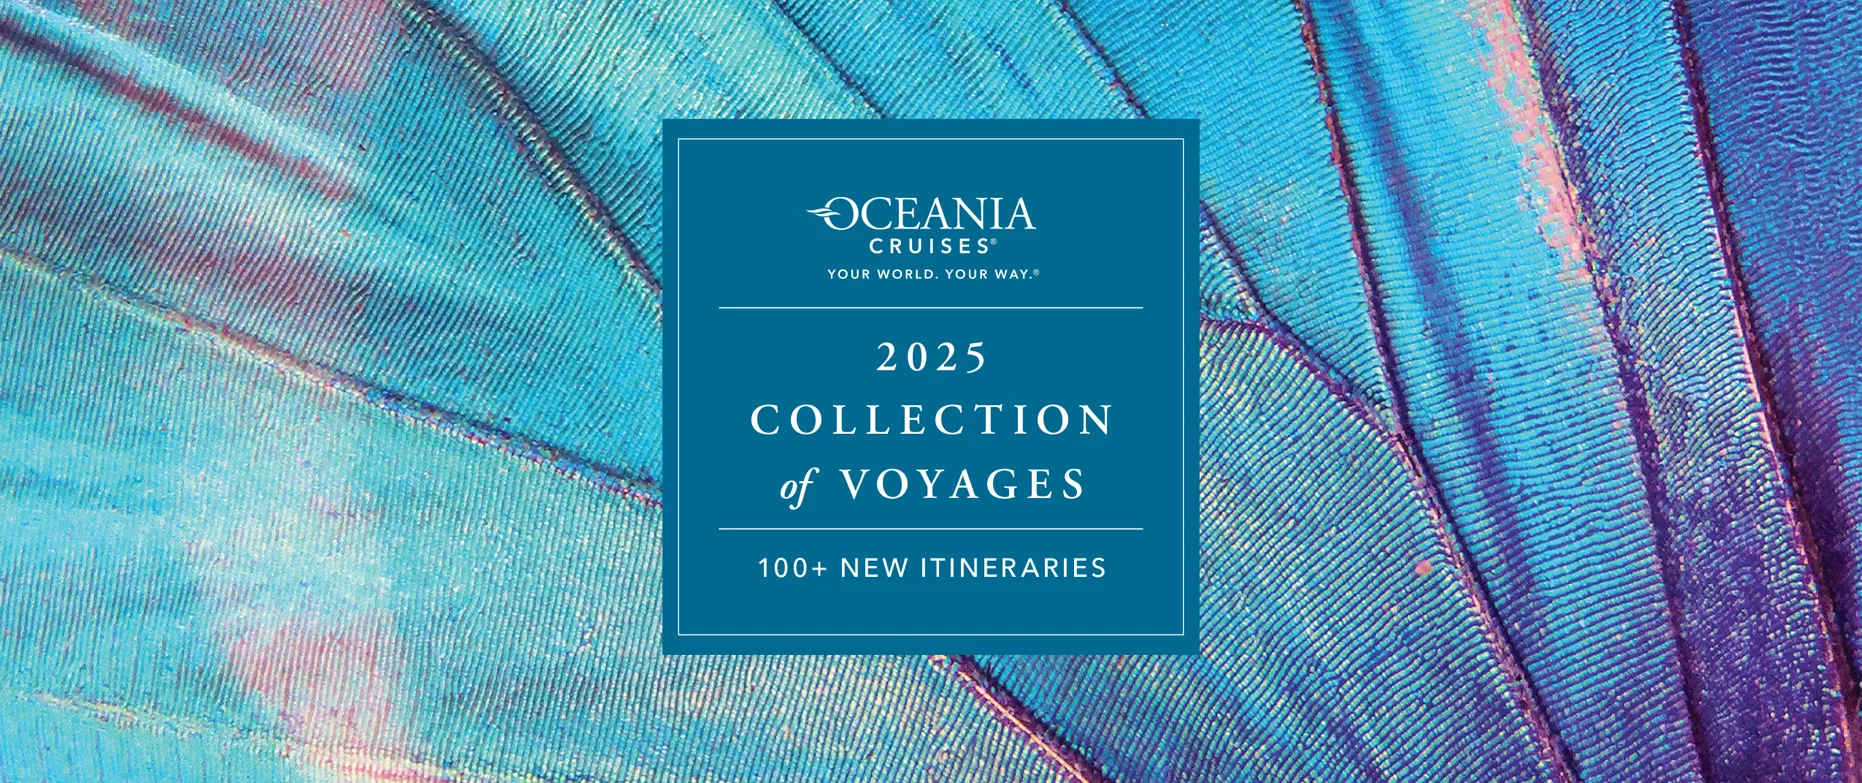 Oceania Cruises Summer 2025 Collection The Cruise Line